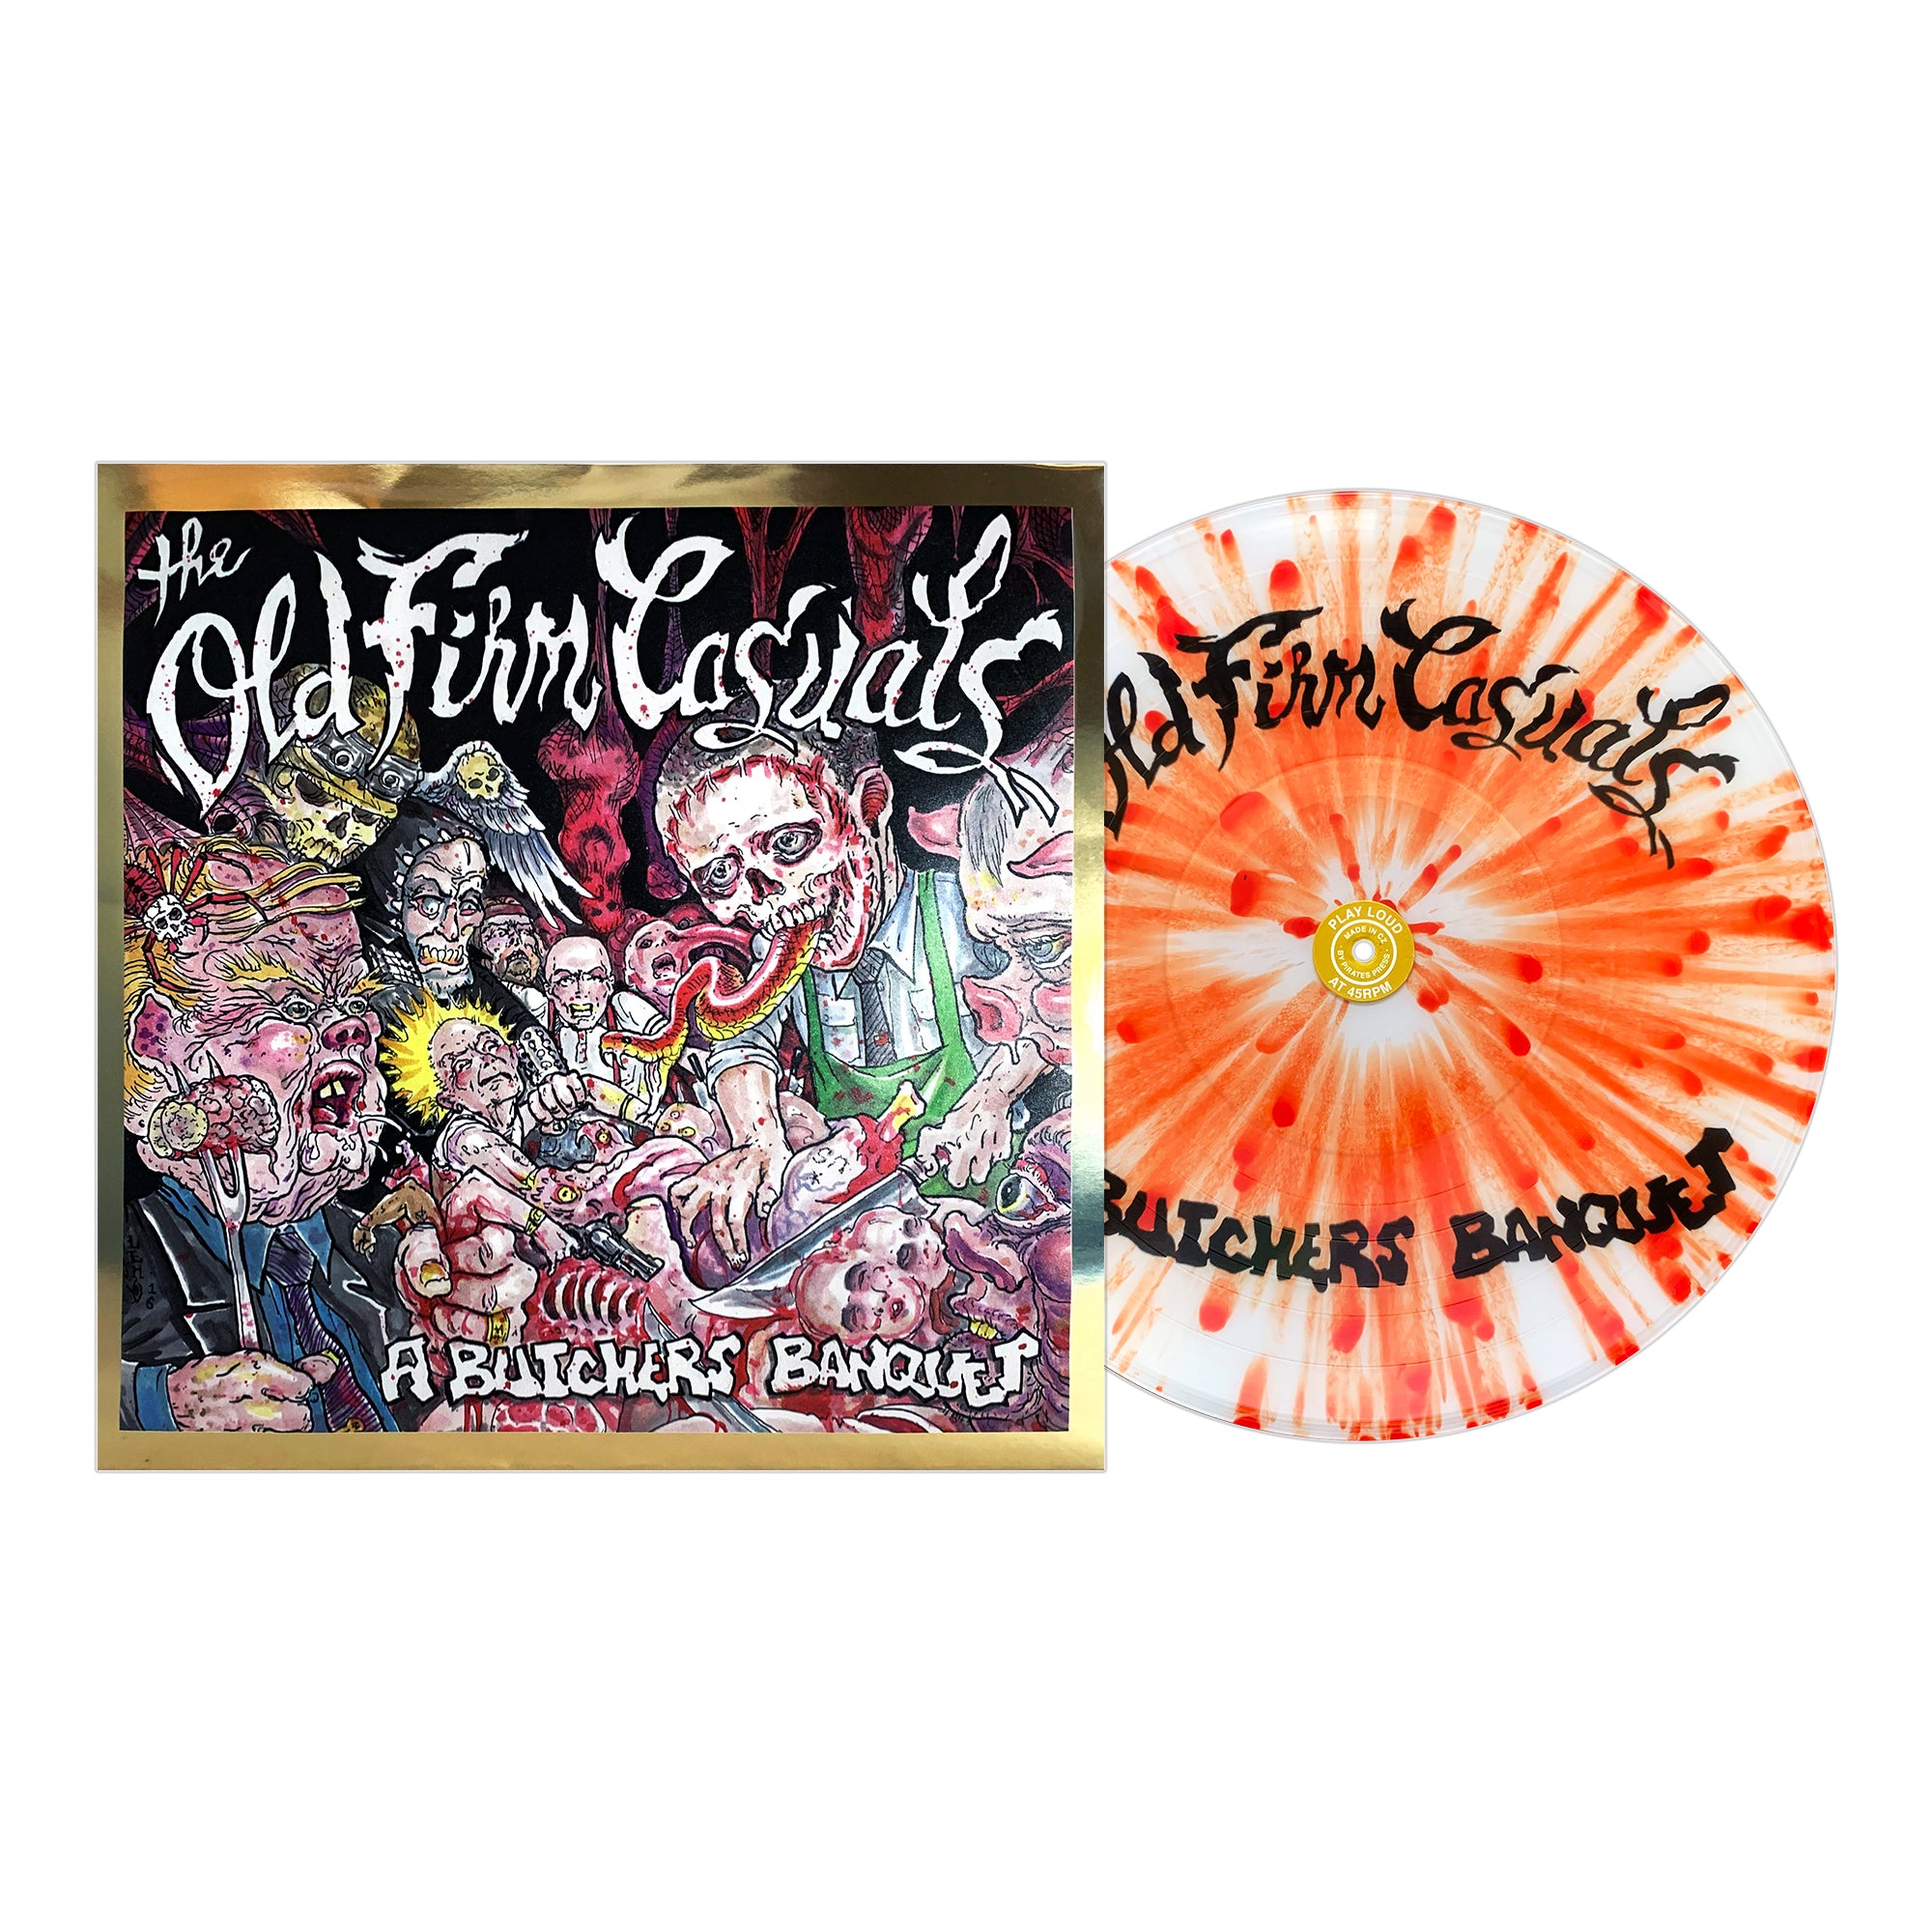 The Old Firm Casuals - A Butcher's Banquet Clear & Red Splatter